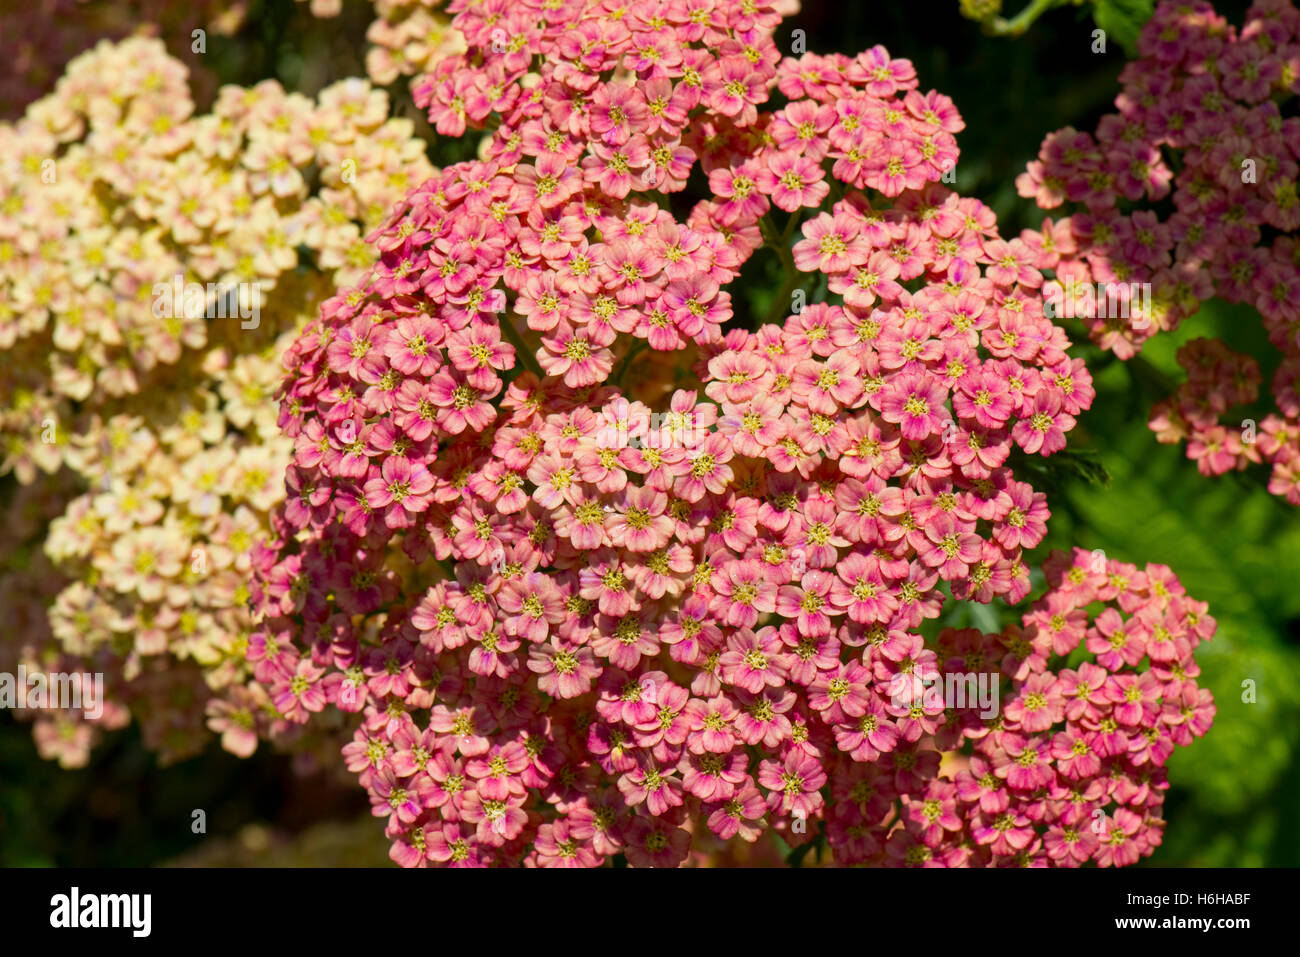 Garden ornamental Achillea flowers in pink and yellow, July Stock Photo